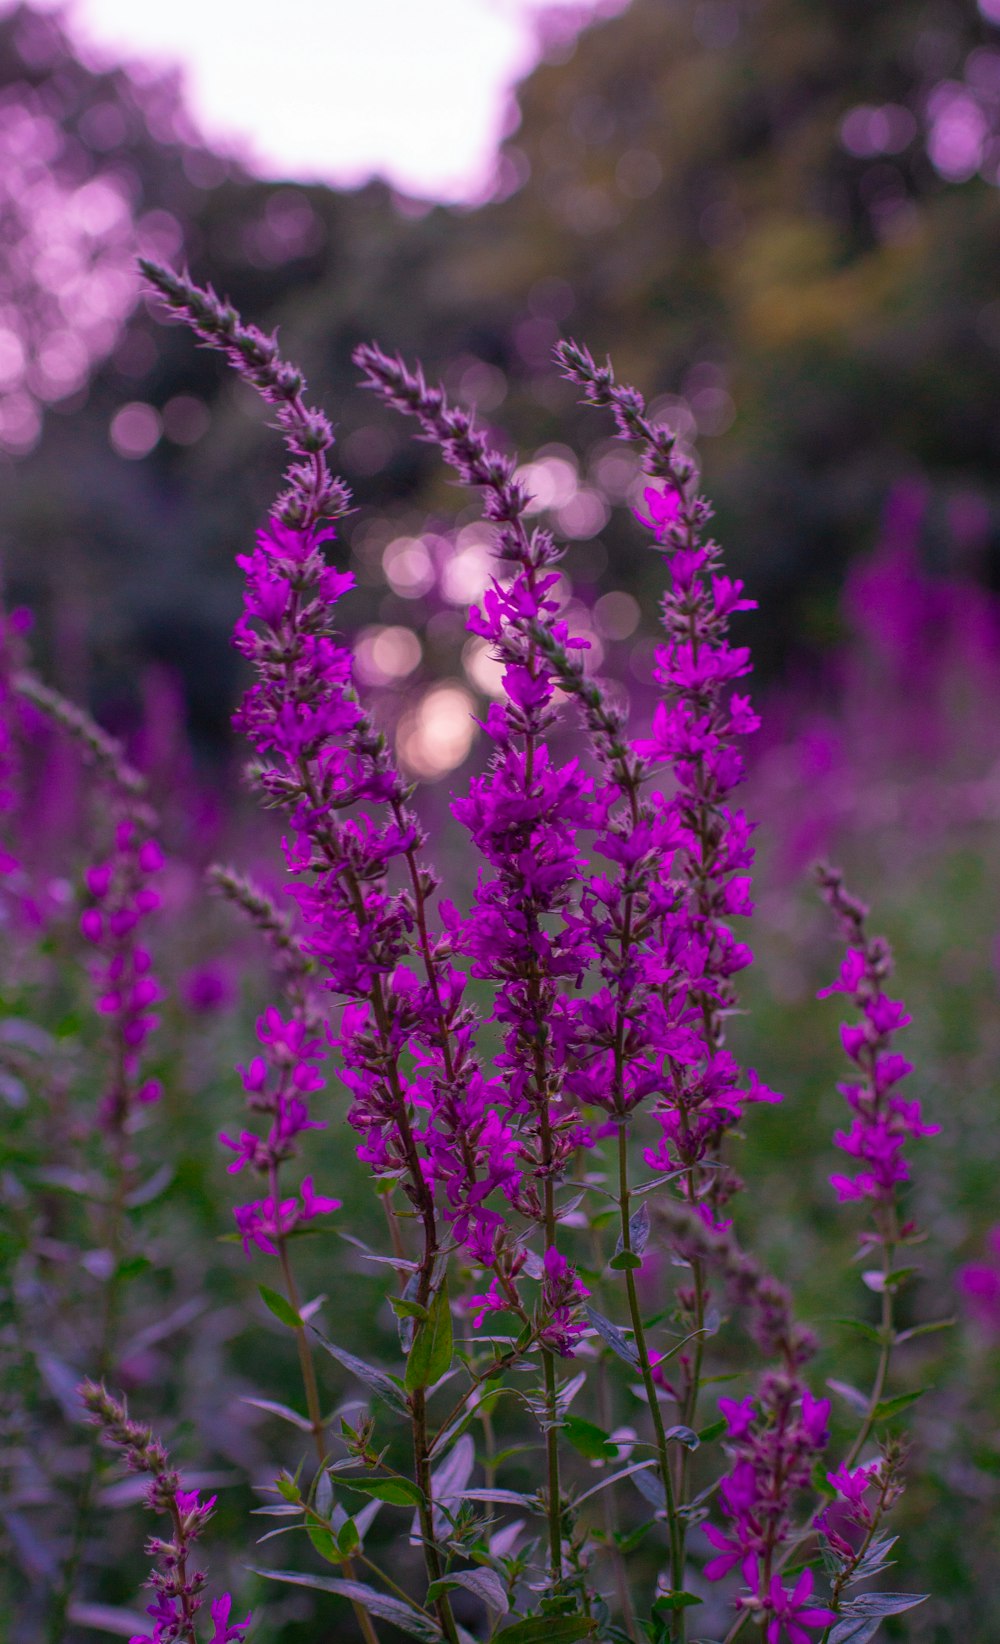 purple flowers in a field with trees in the background